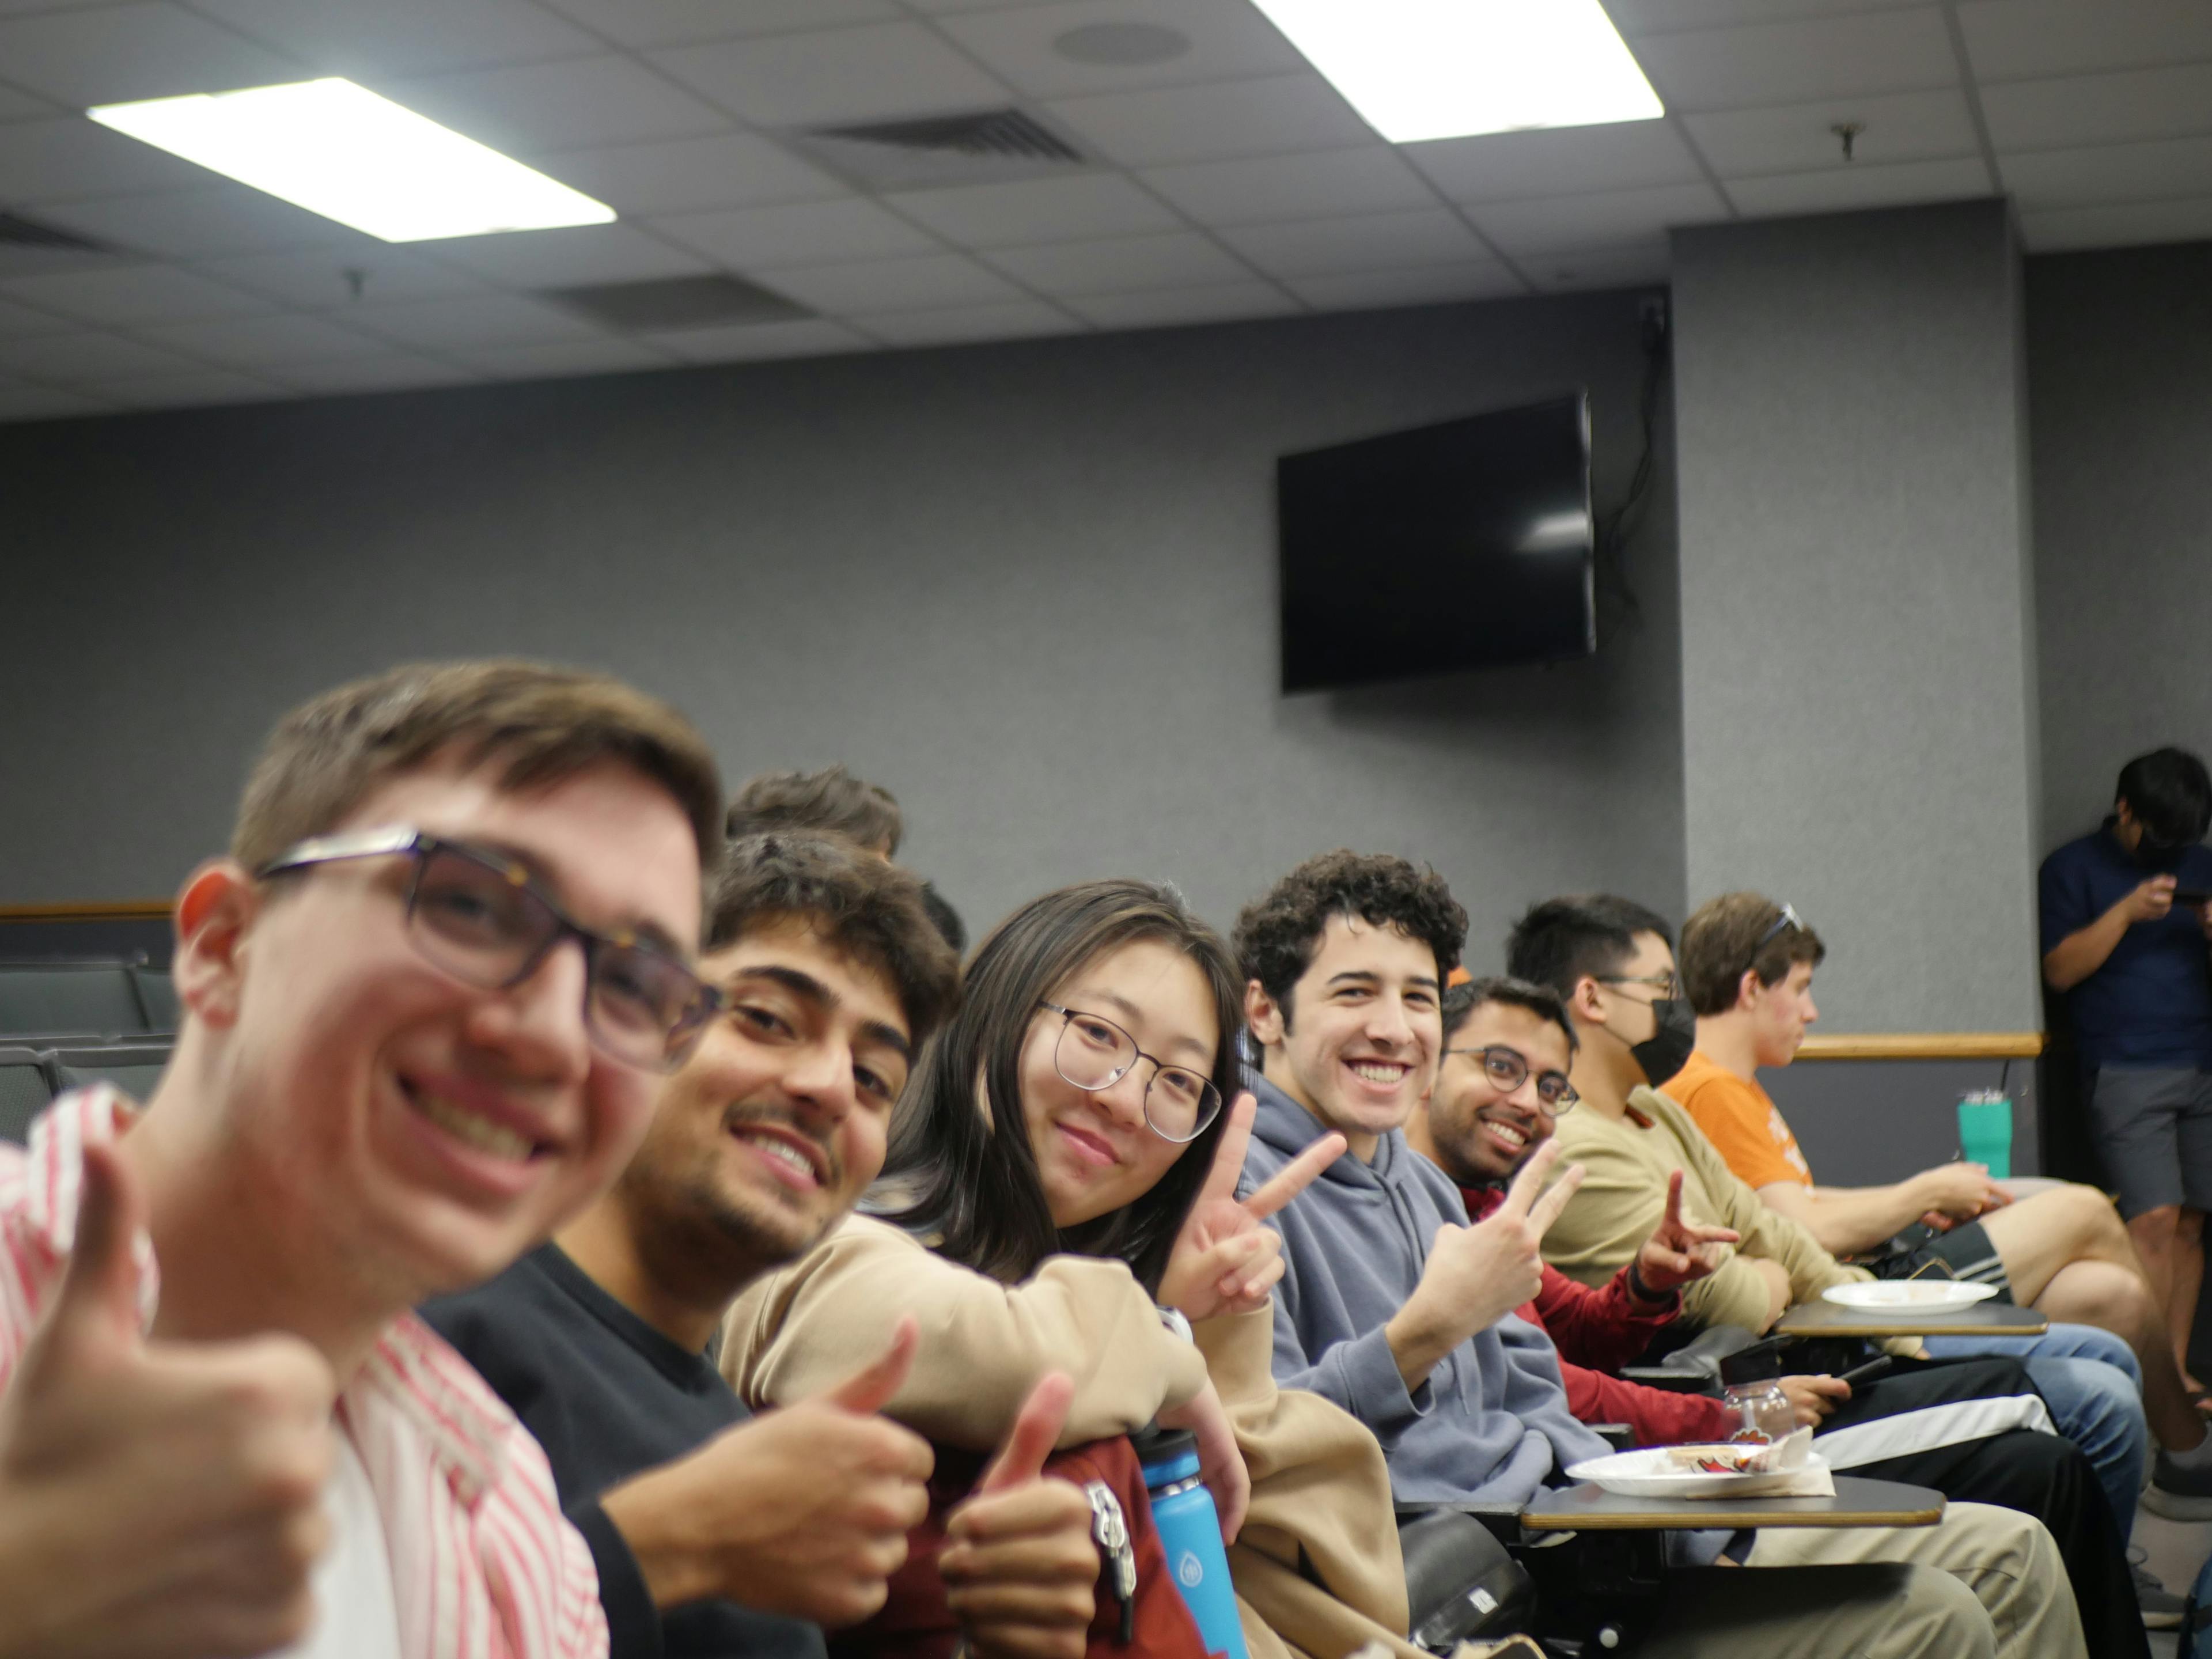 IEEE students seated in a classroom row, smiling at the camera